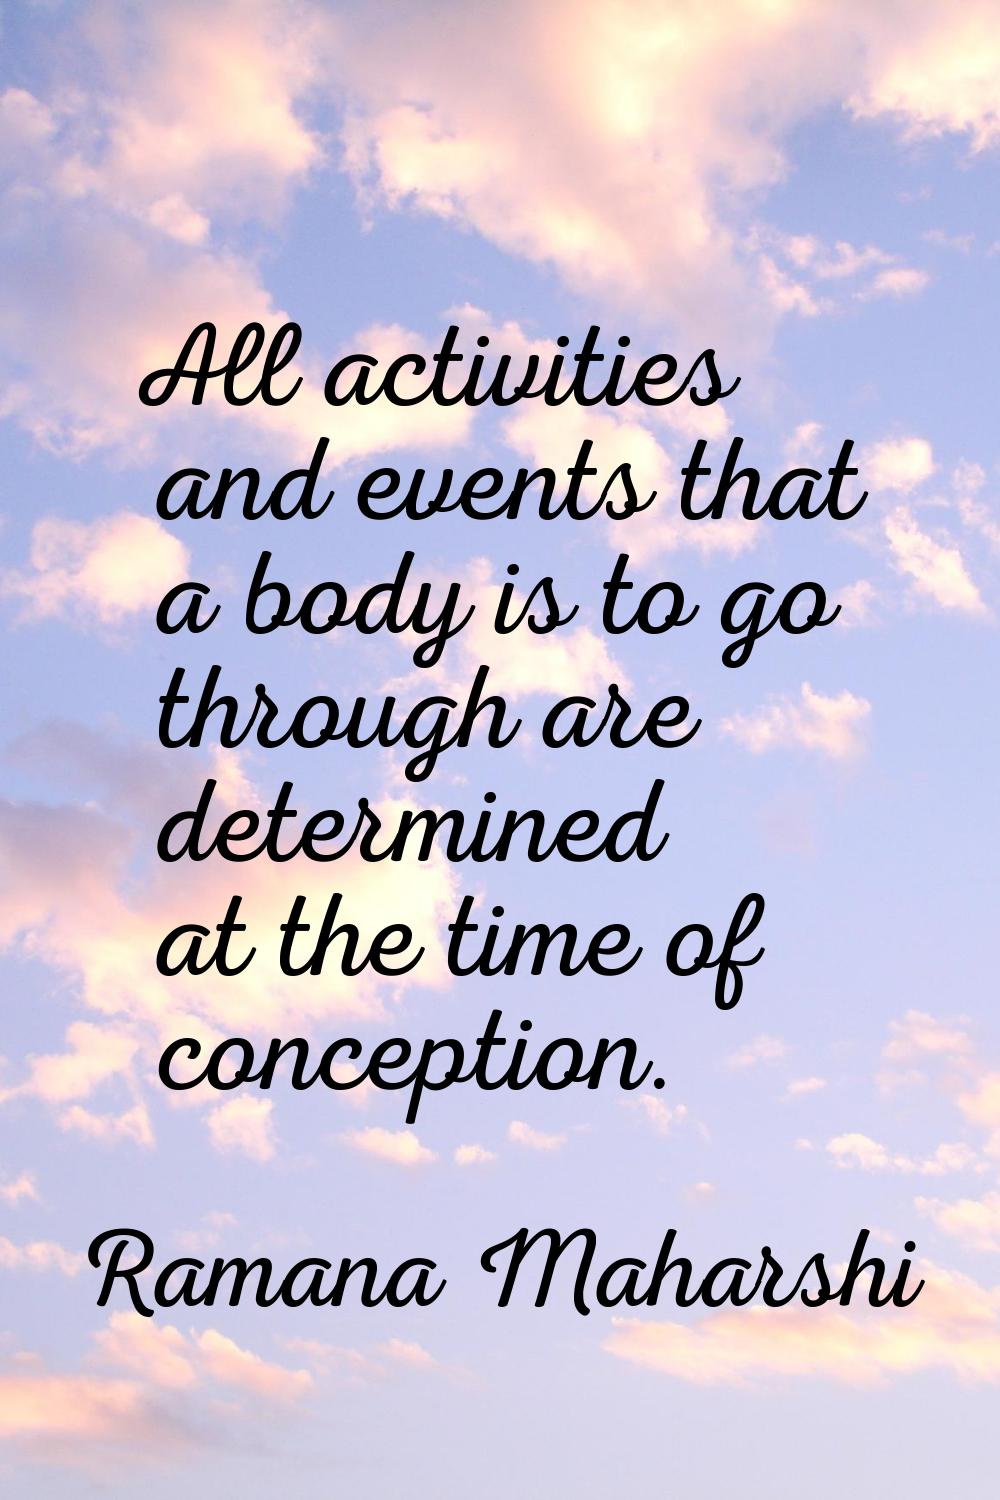 All activities and events that a body is to go through are determined at the time of conception.